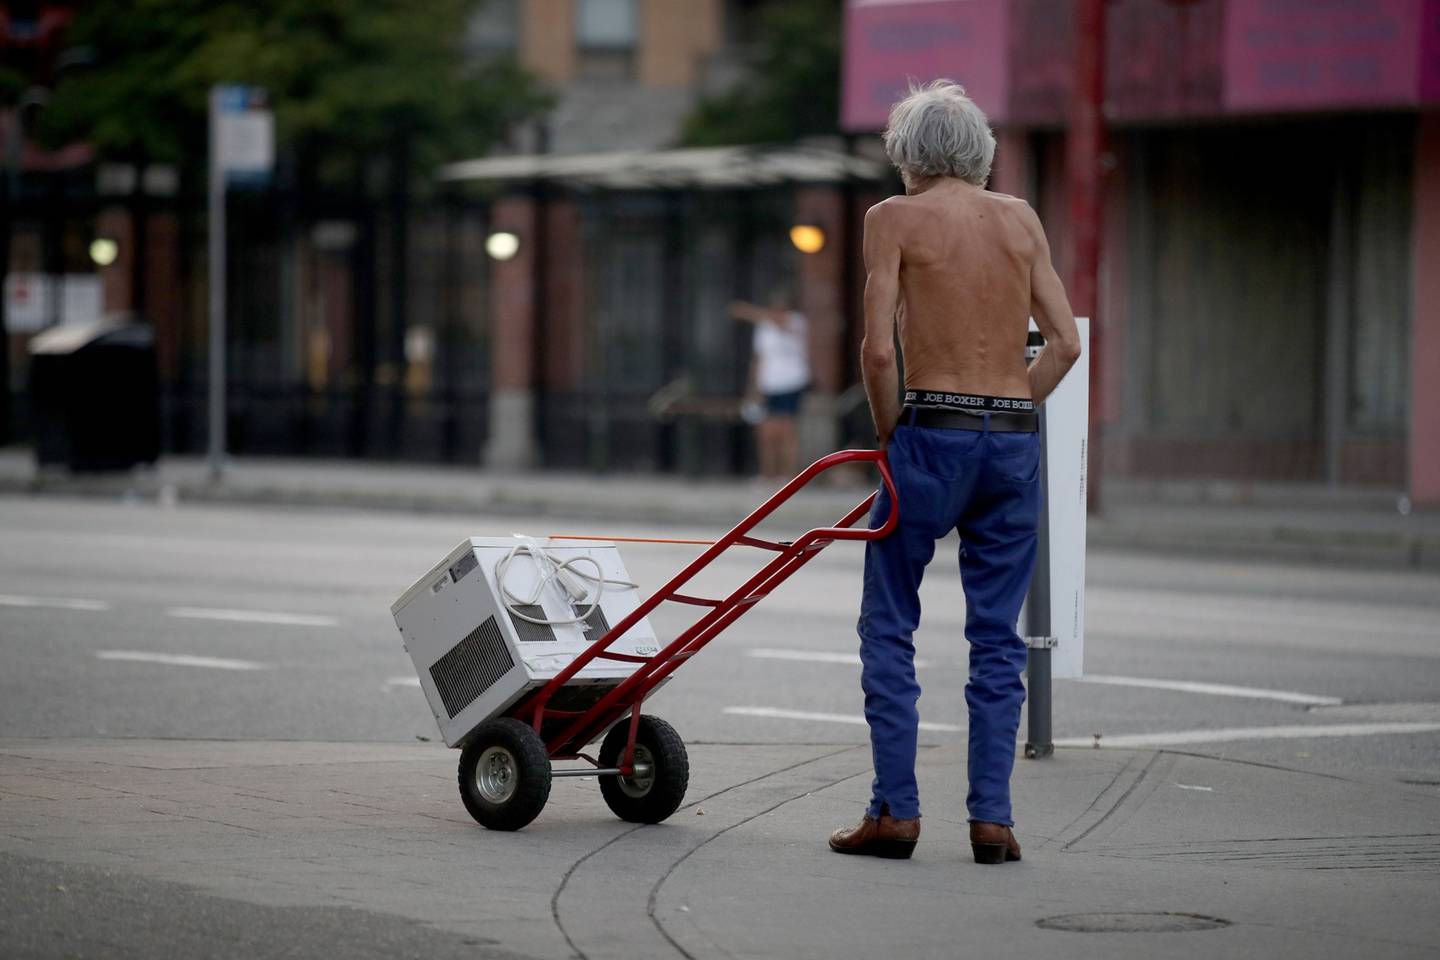 Elderly people are among the most vulnerable to extreme weather events such as heatwaves. Bloomberg